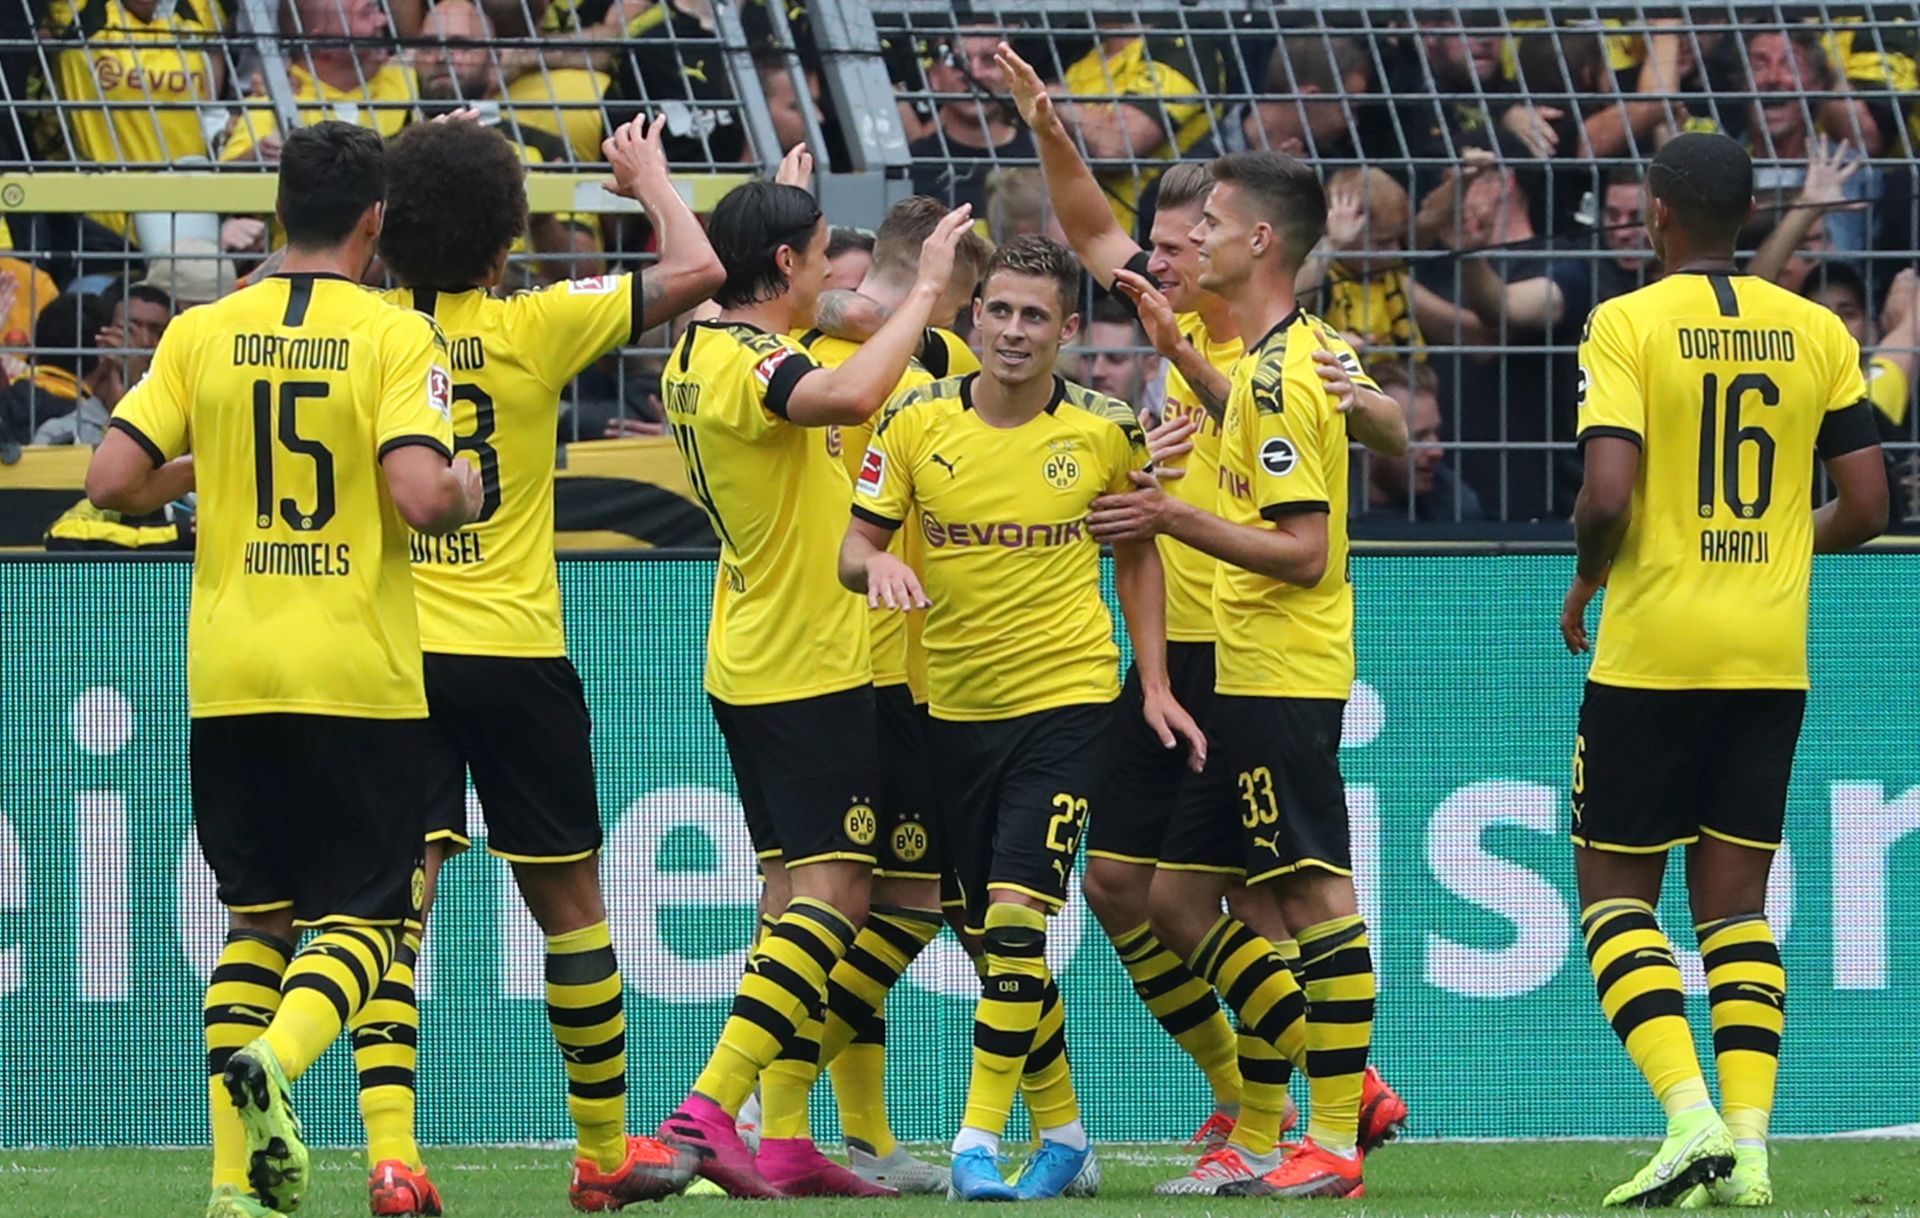 epa07777865 Dortmund's players celebrate the 3-1 goal during the German Bundesliga soccer match between Borussia Dortmund and FC Augsburg in Dortmund, Germany, 17 August 2019.  EPA/FOCKE STRANGMANN CONDITIONS - ATTENTION: The DFB regulations prohibit any use of photographs as image sequences and/or quasi-video.